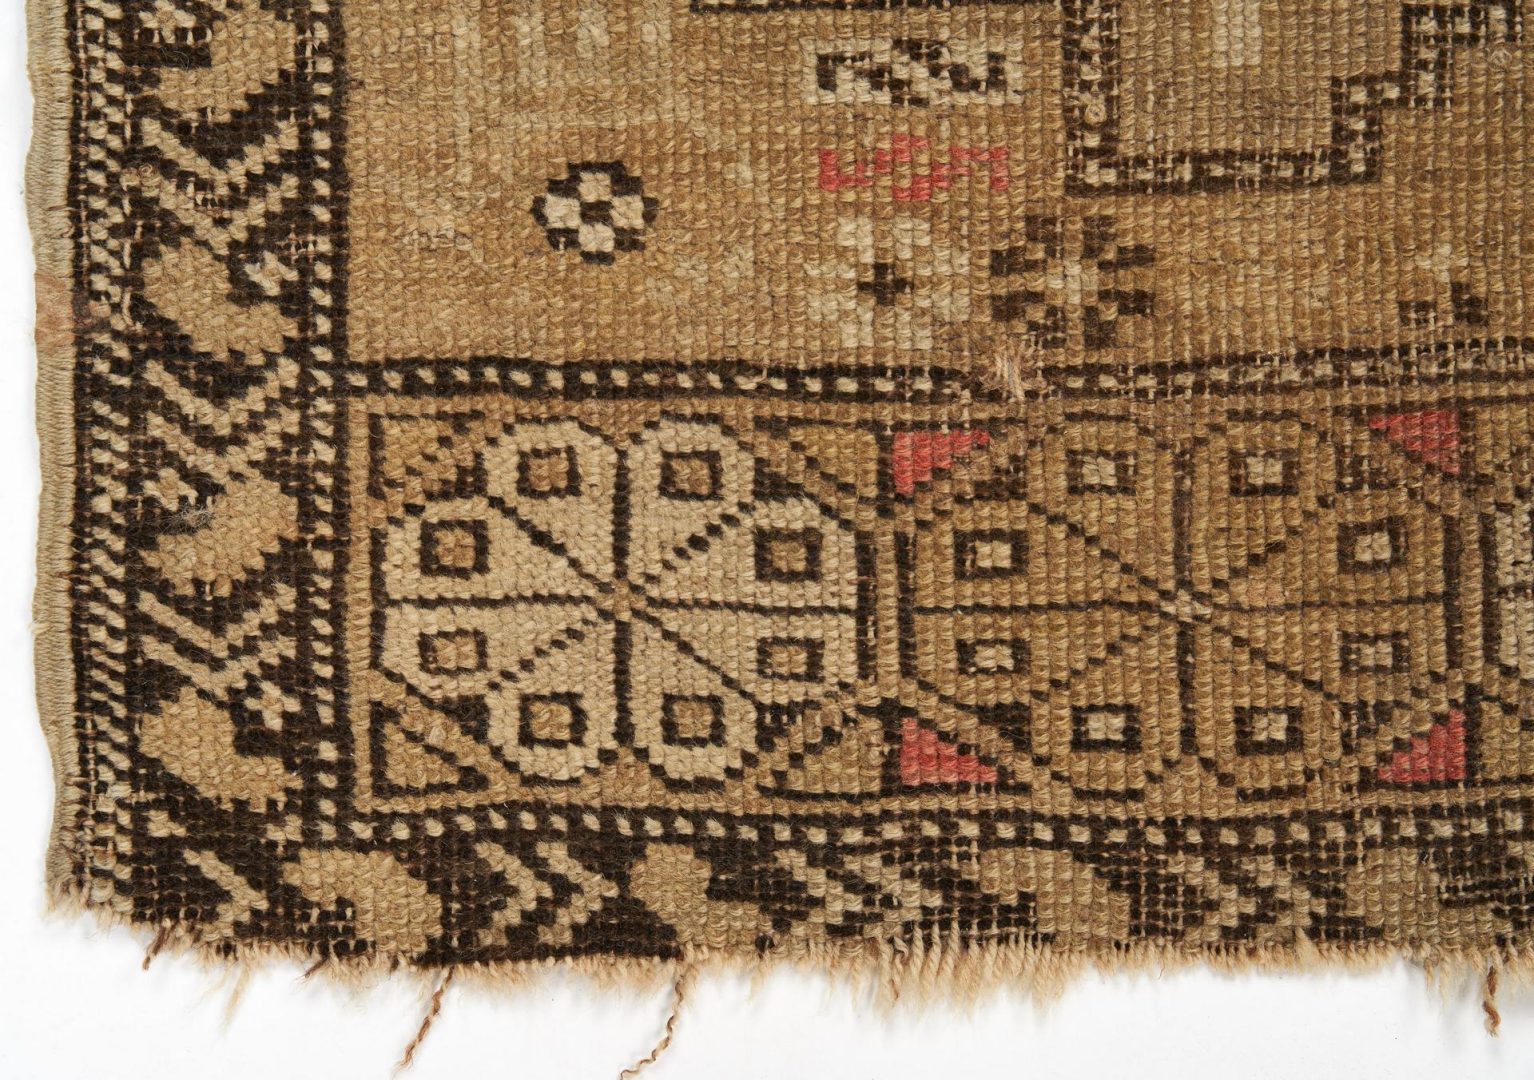 Lot 1024: 2 Small Turkish Rugs or Weavings